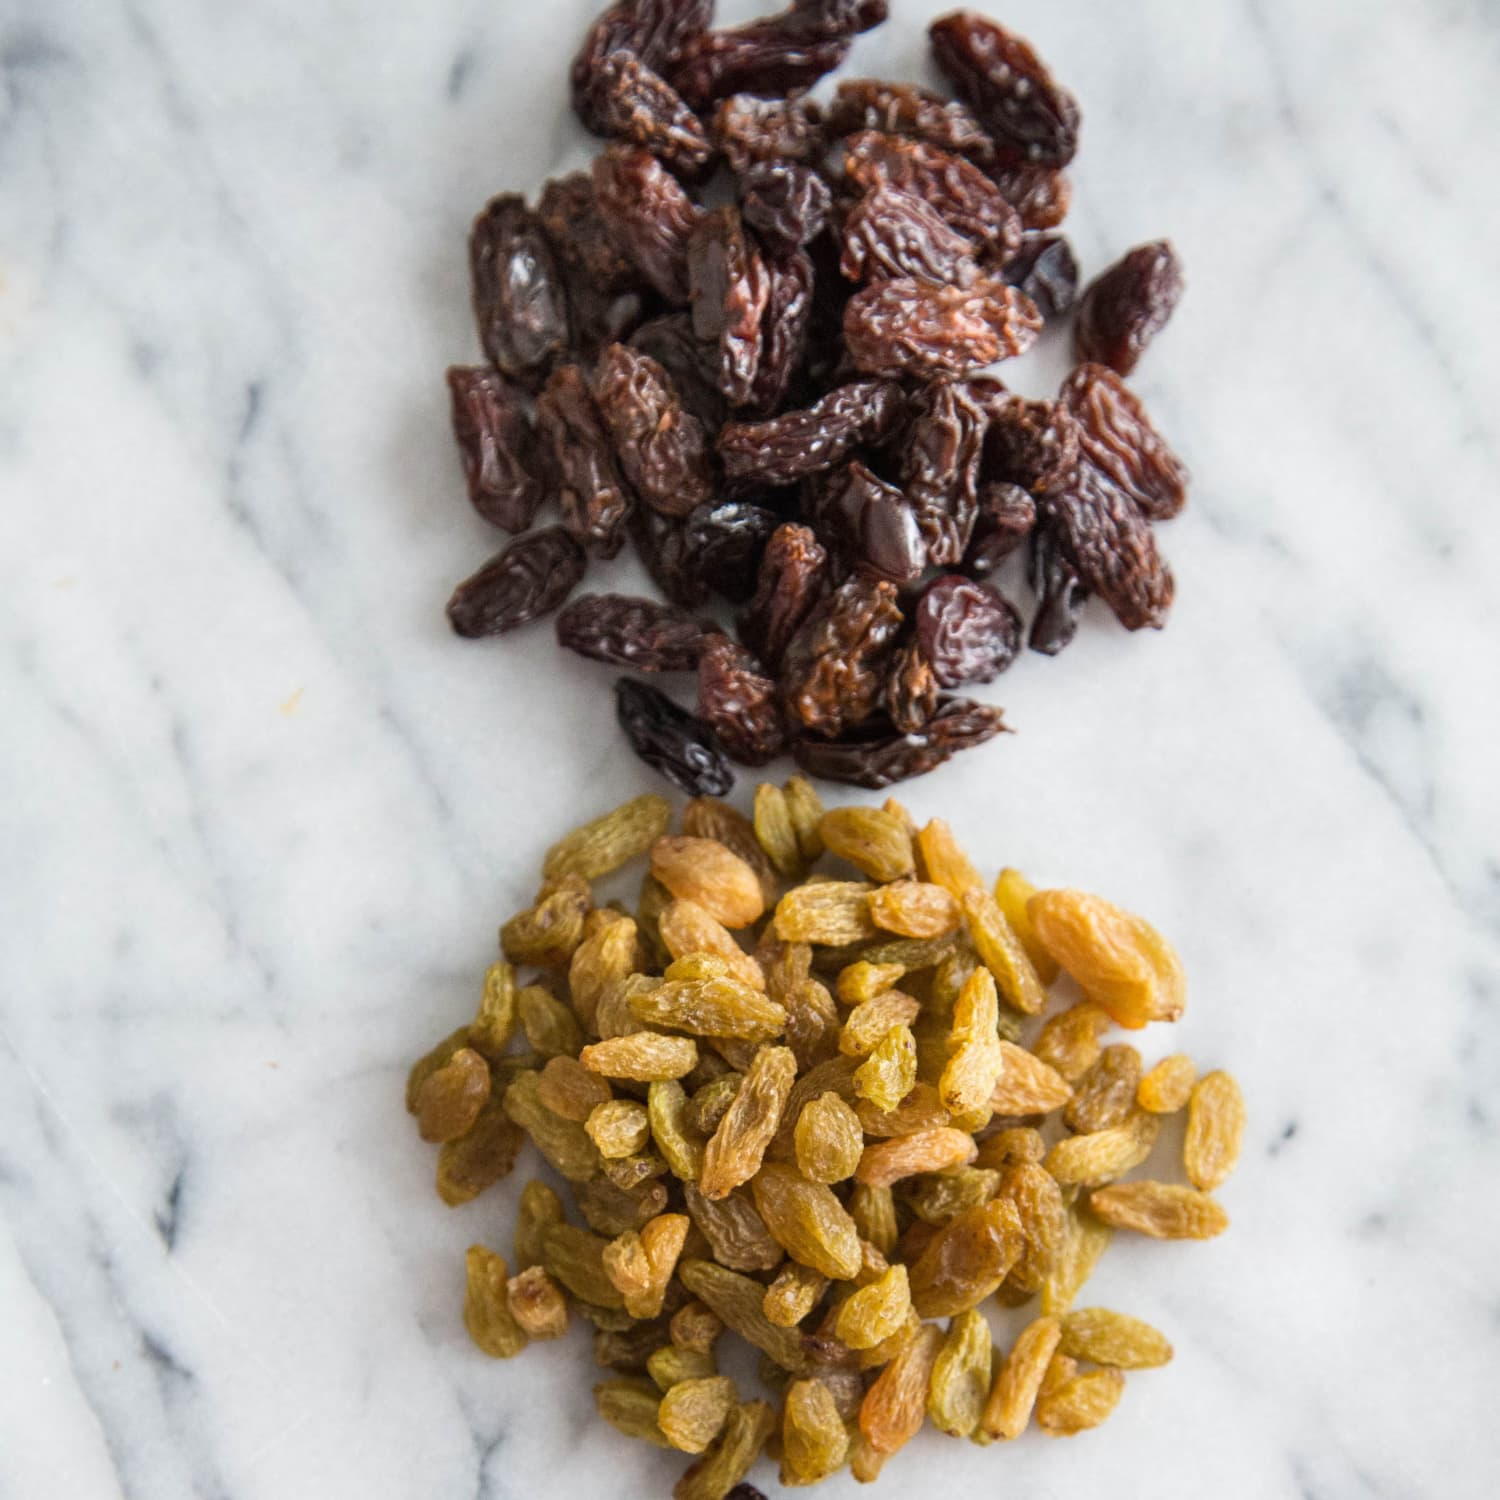 Raisins vs Sultanas vs Currants: What's The Difference? | Kitchn